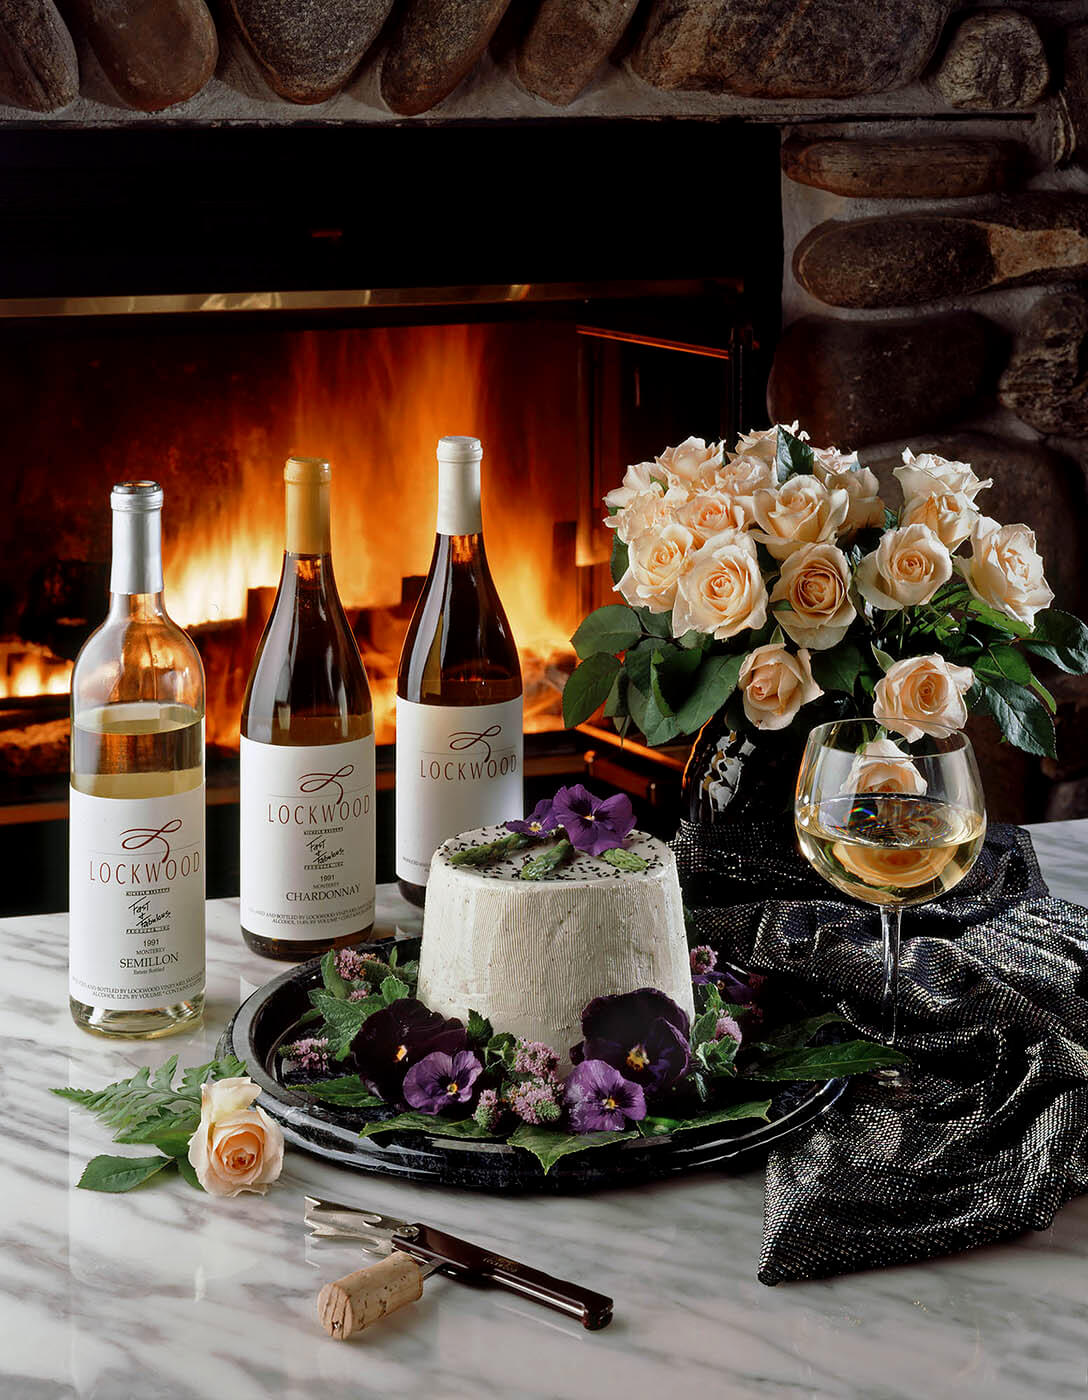 Lockwood wines such as Semillon and Chardonnay pair perfectly with this goat cheese hors d'oeuvres.  Pictured here with a warm fire in a home setting.  Food photography by Craig Lovell